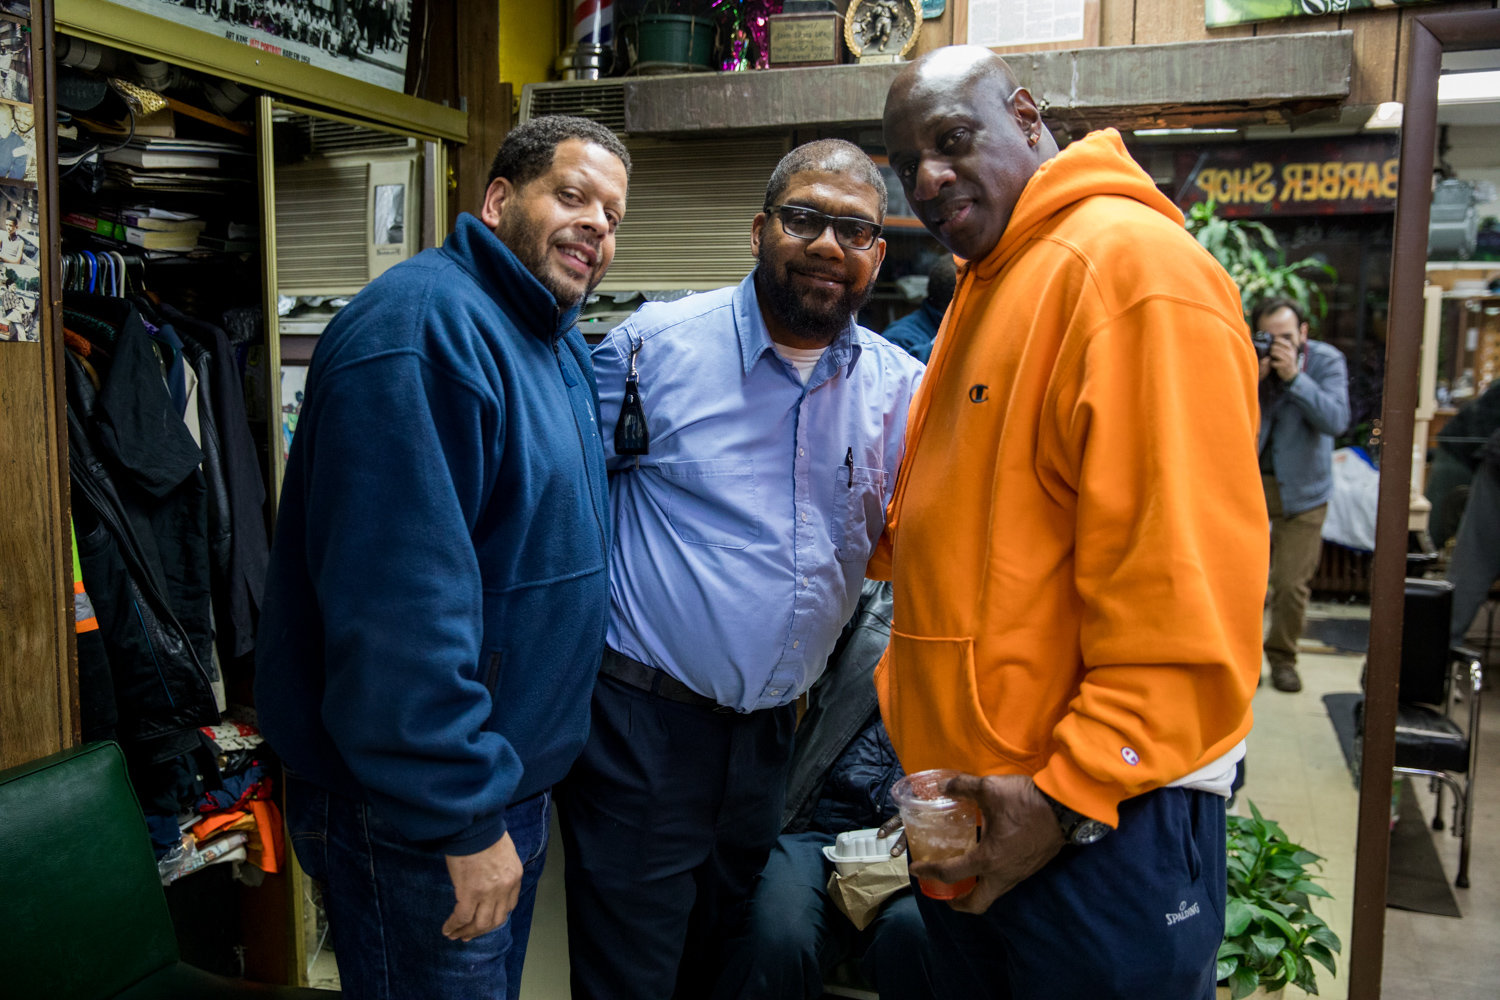 Walter Watson, center, smiles with Scott Dread and Cornell Colton inside Marble Hill’s International Unisex Salon on March 6. Watson died of complications related to COVID-19 on May 4. He was 55.